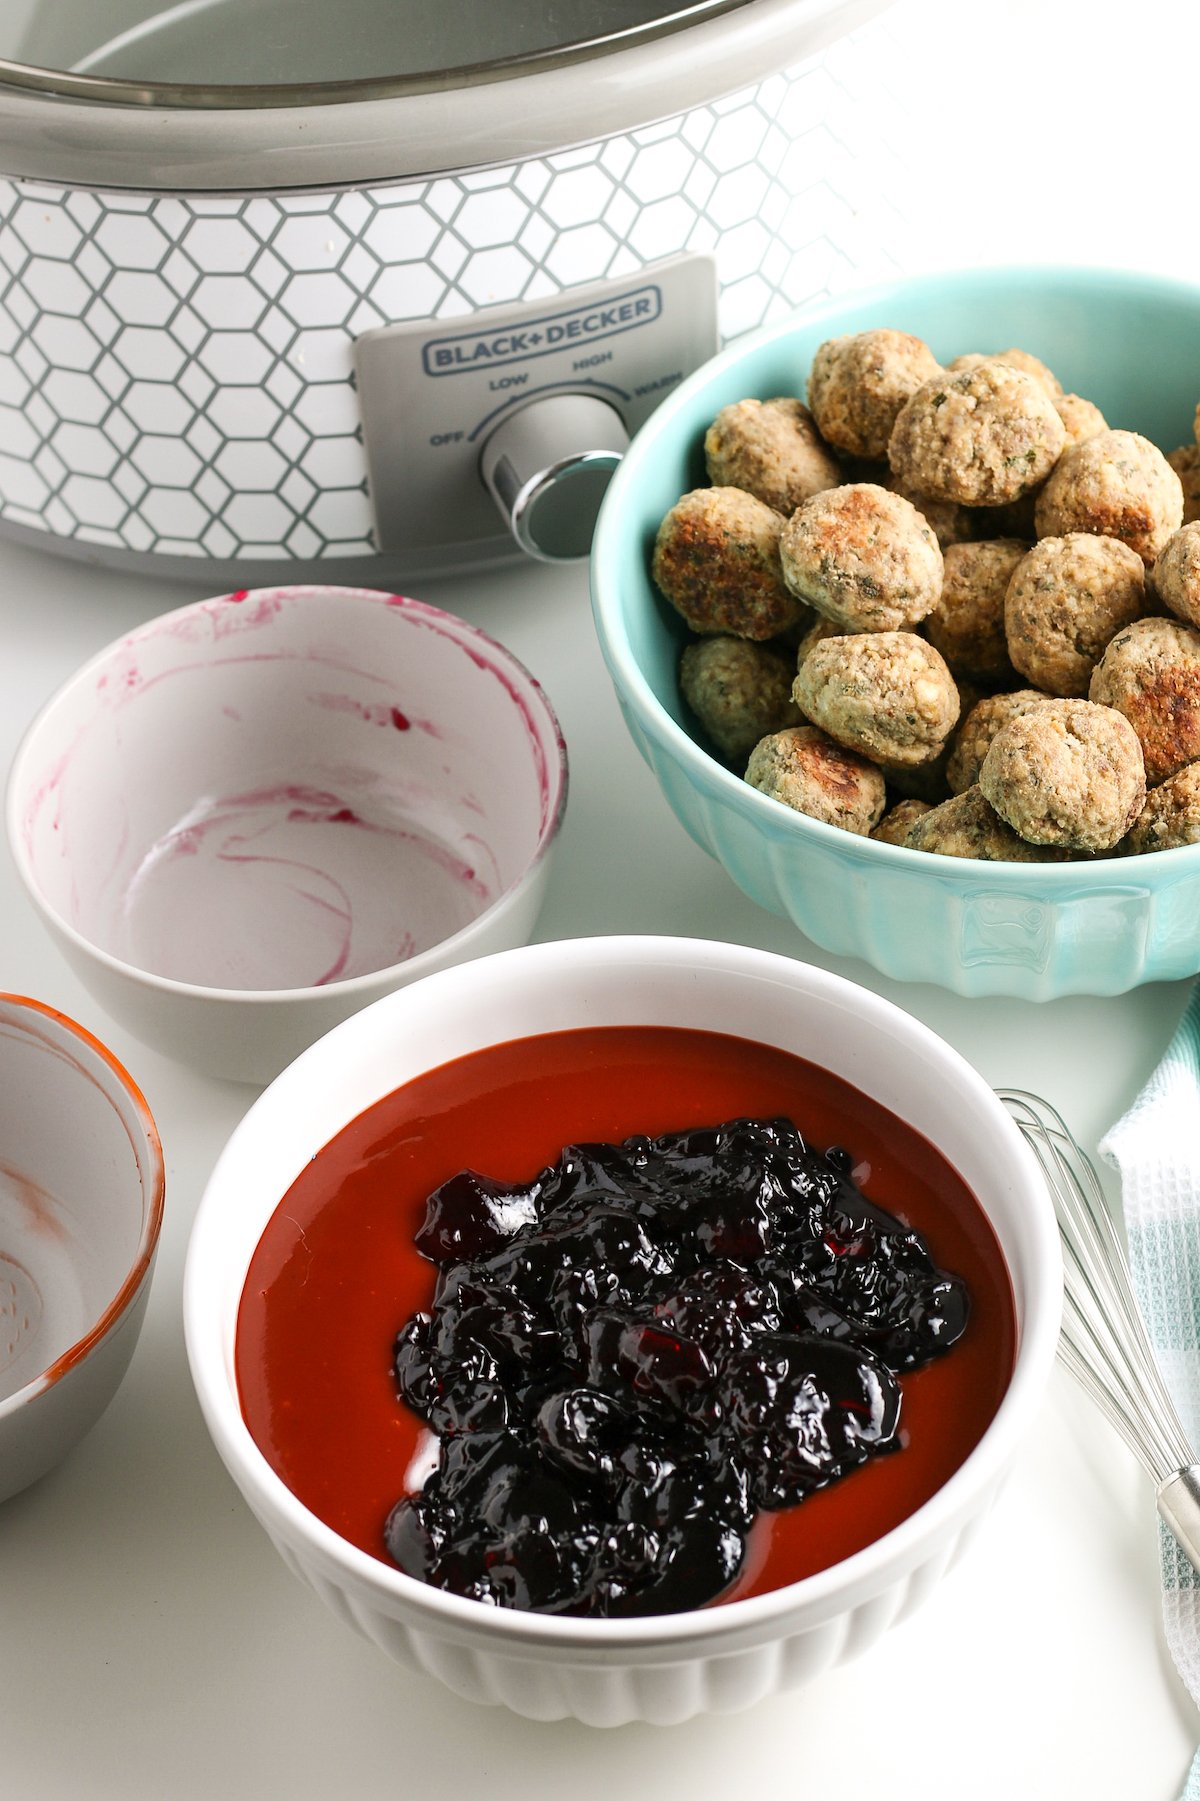 Jelly and barbecue sauce in a bowl, next to a dish of meatballs and a crockpot.